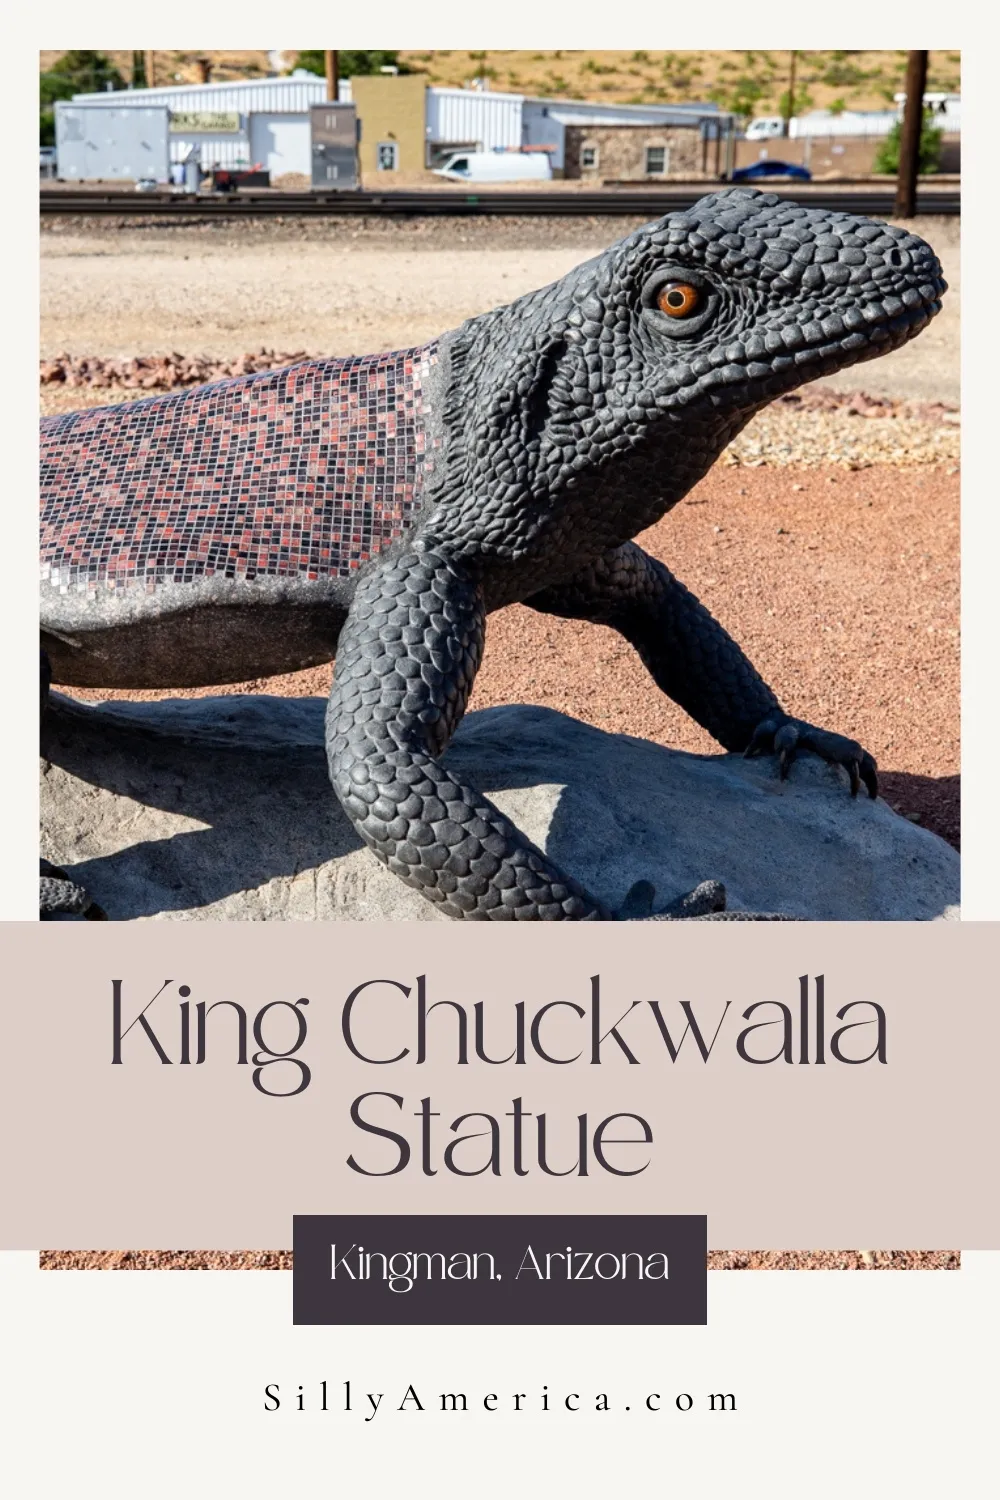 If you're driving through Arizona on a Route 66 road trip, you might find a few native chuckwalla lizards on the side of the road. But I guarantee you won't find any bigger than this one: the King Chuckwalla Statue in Kingman, Arizona. Visit this Arizona roadside attraction on your Route 66 road trip. Add it to your travelitinerary and bucket list! #Route66 #Route66RoadTrip #RoadsideAttraction #RoadsideAttractions #ArizonaRoadsideAttraction